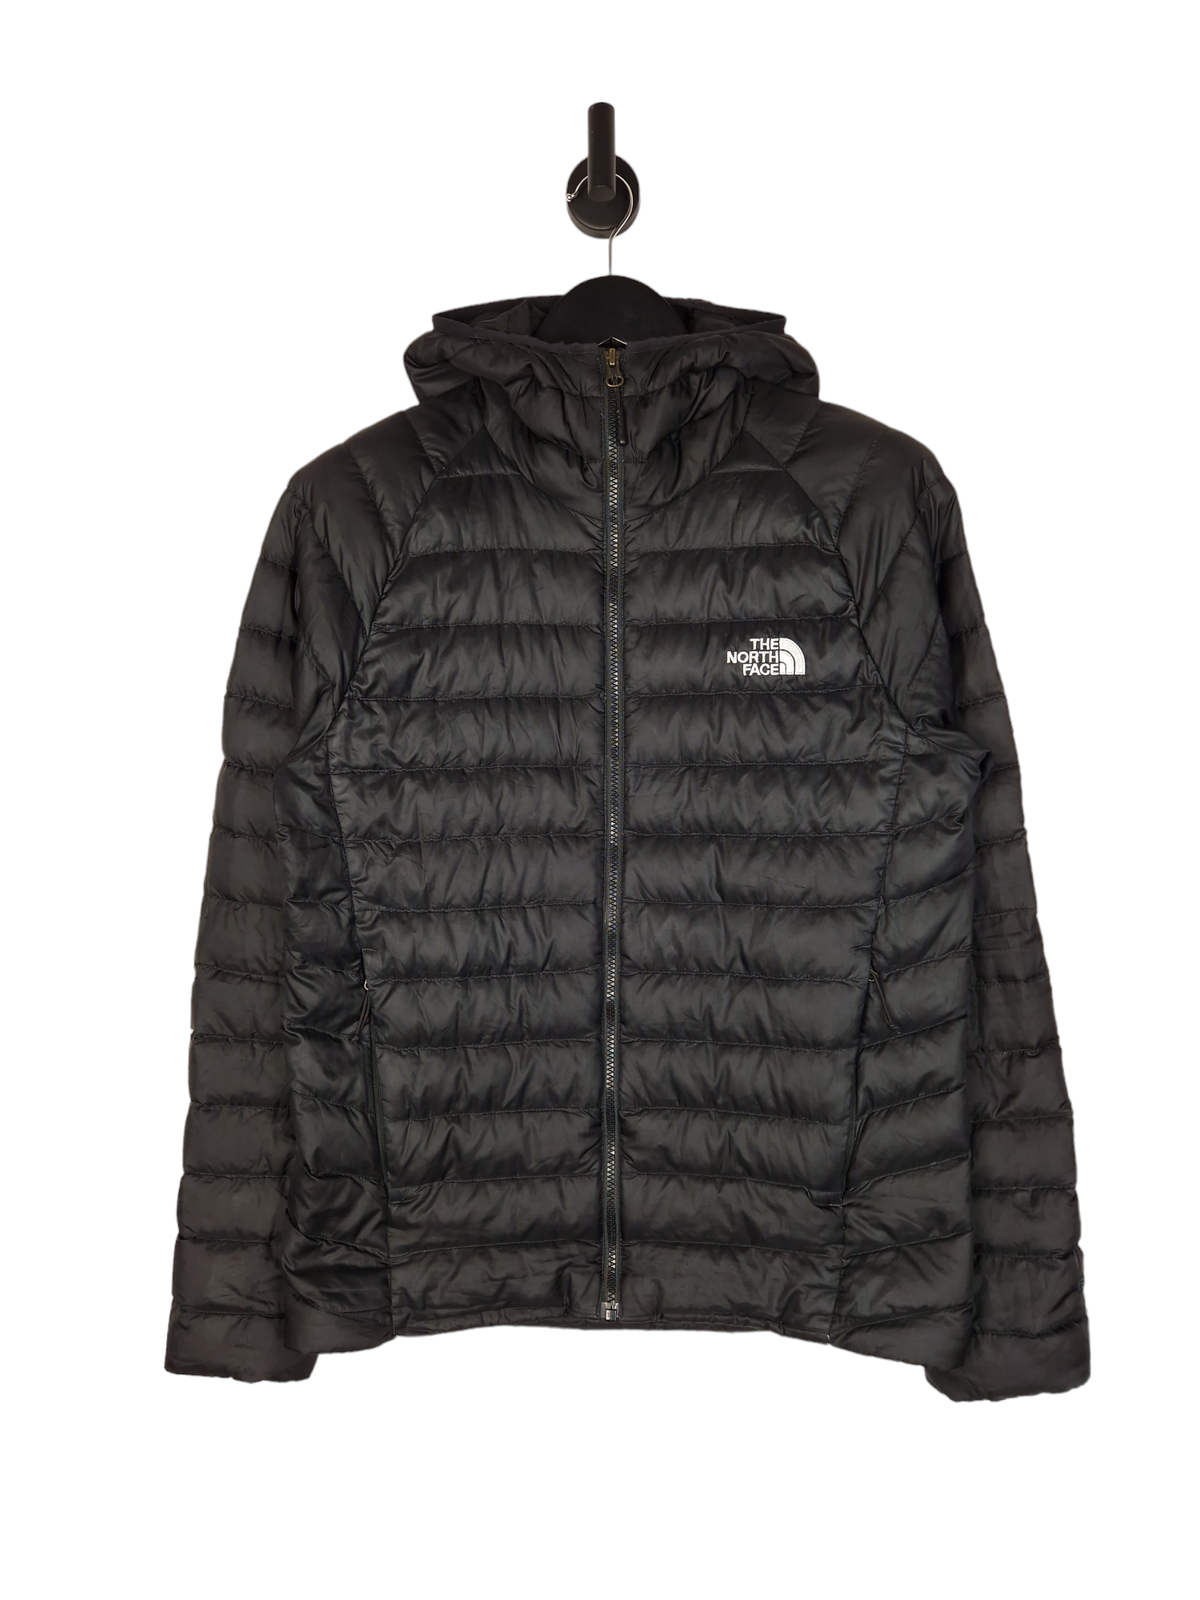 The North Face 700 Puffer Jacket - Size Small